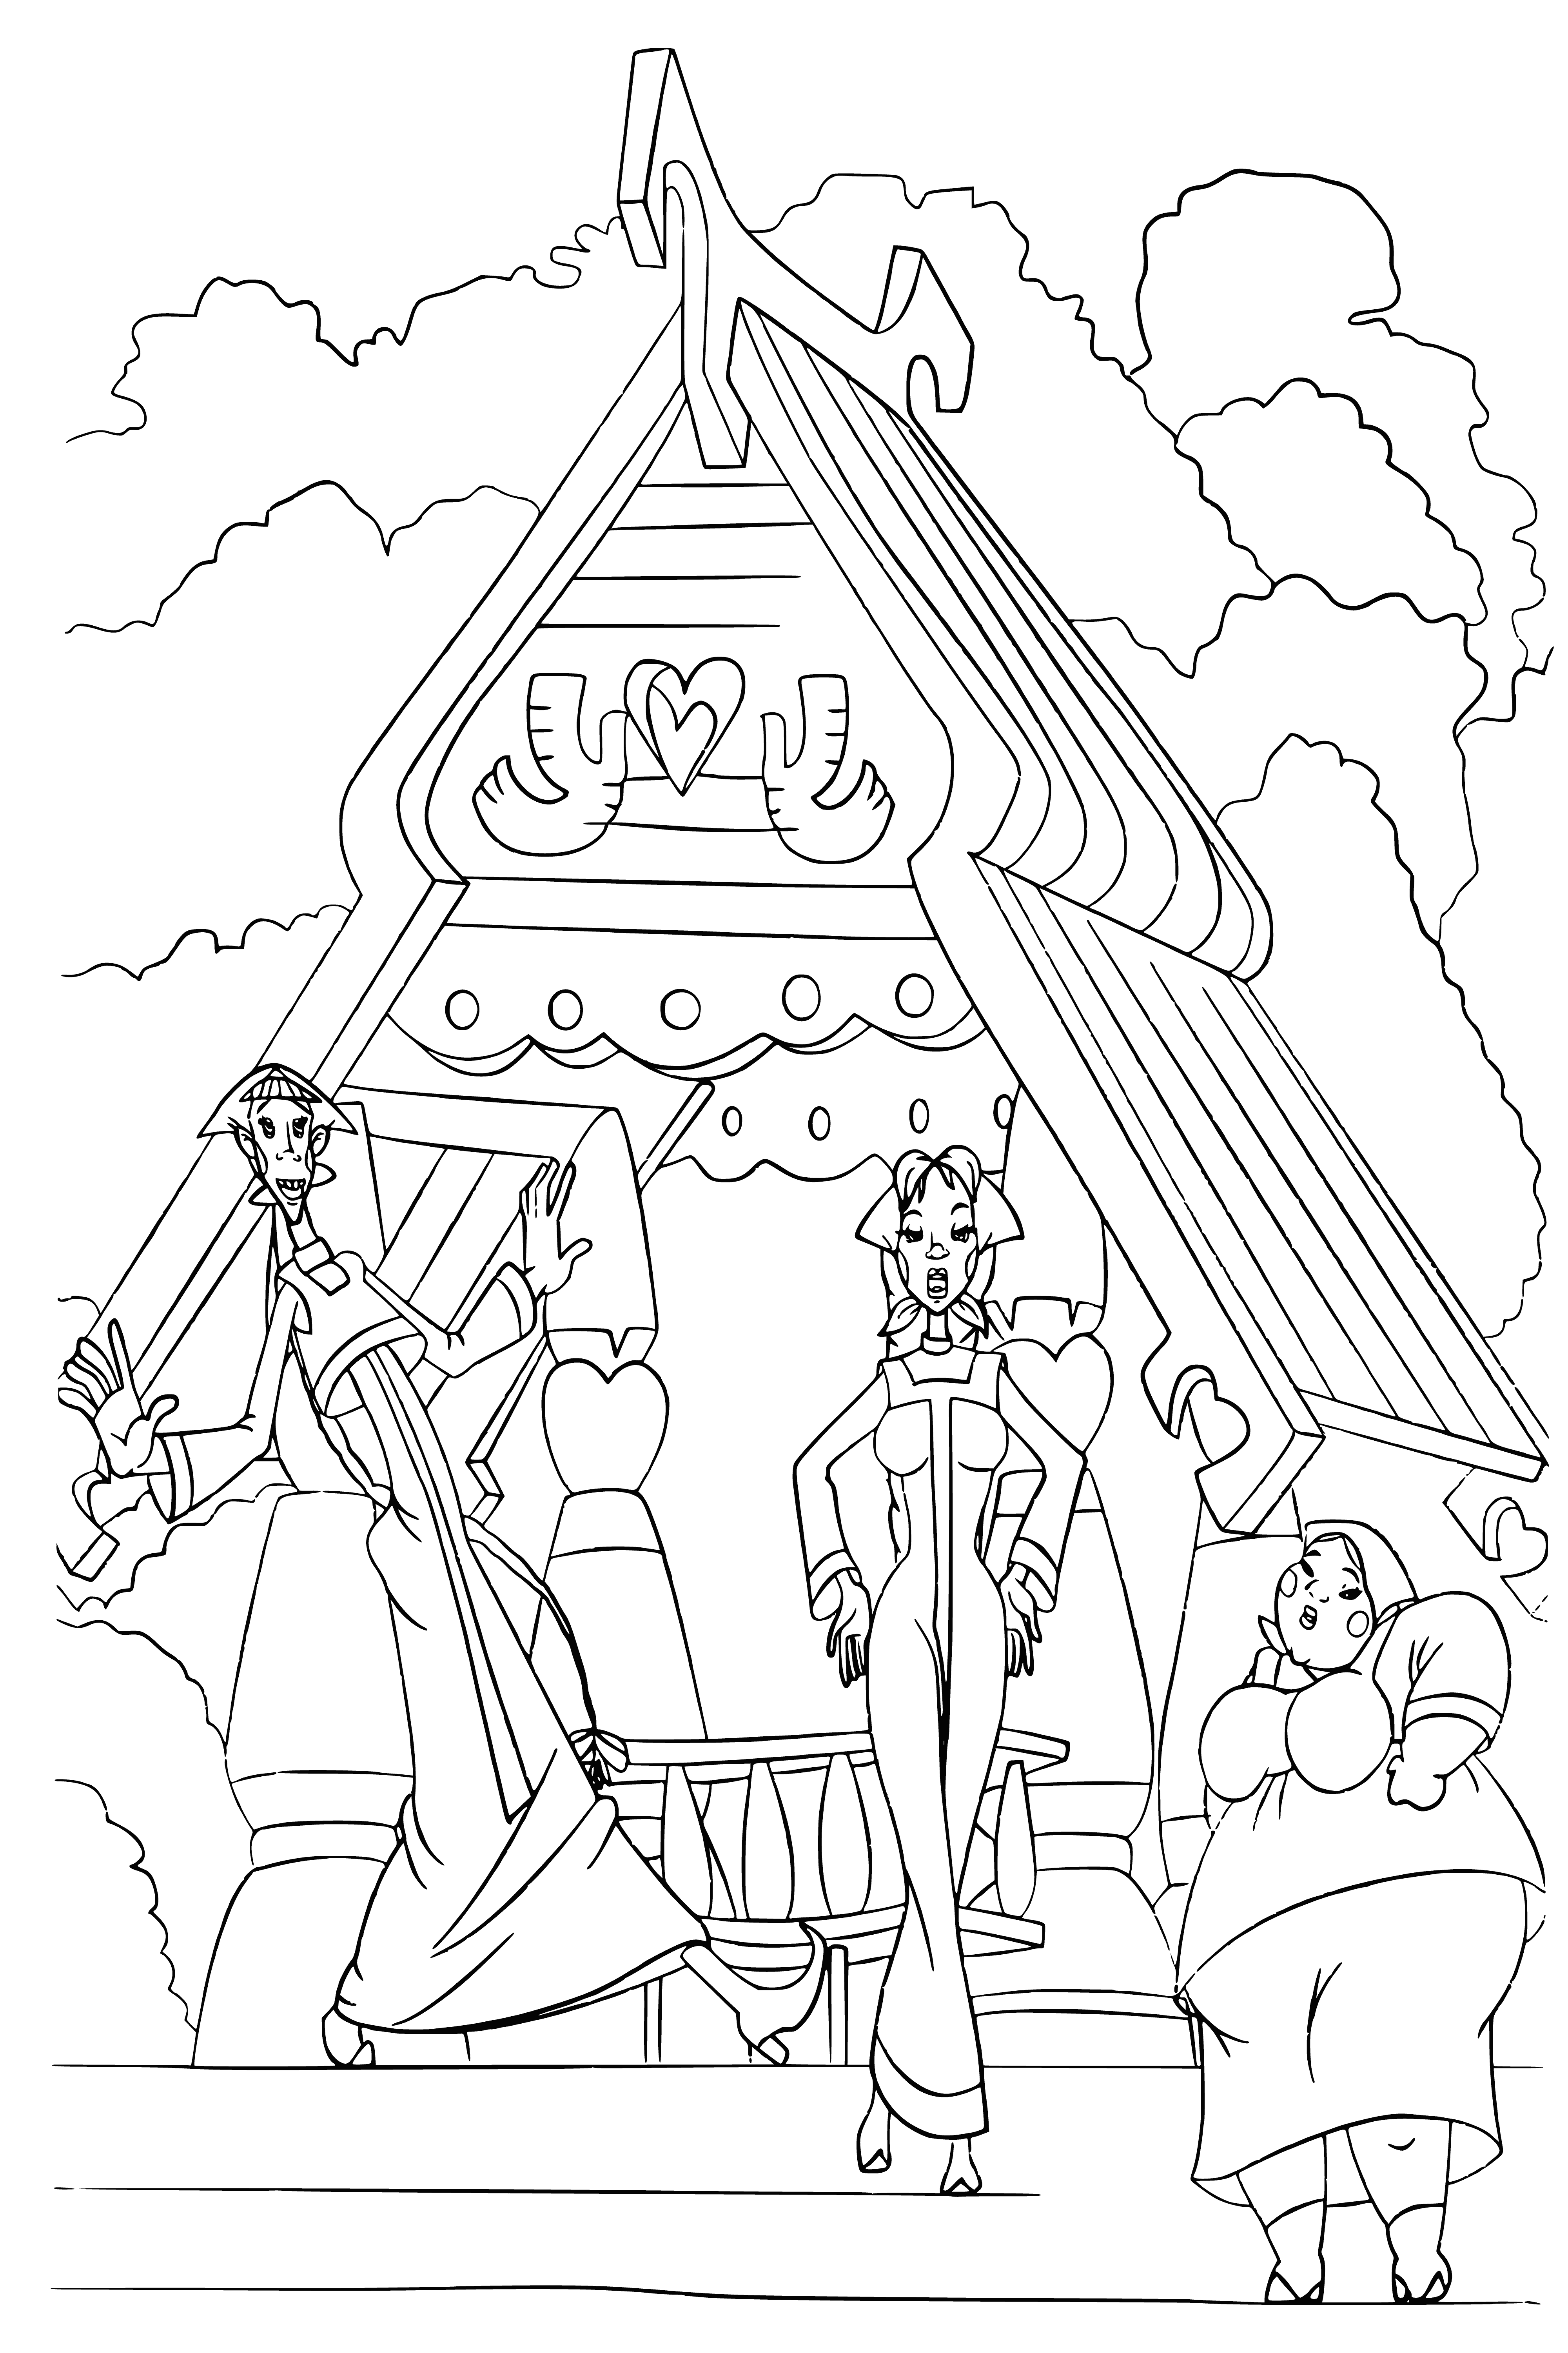 coloring page: 3 girls in white dresses, hair in long braids, each holding a flower. A large serpent is coiled around a tree in the background. Appears to be dancing/playing.